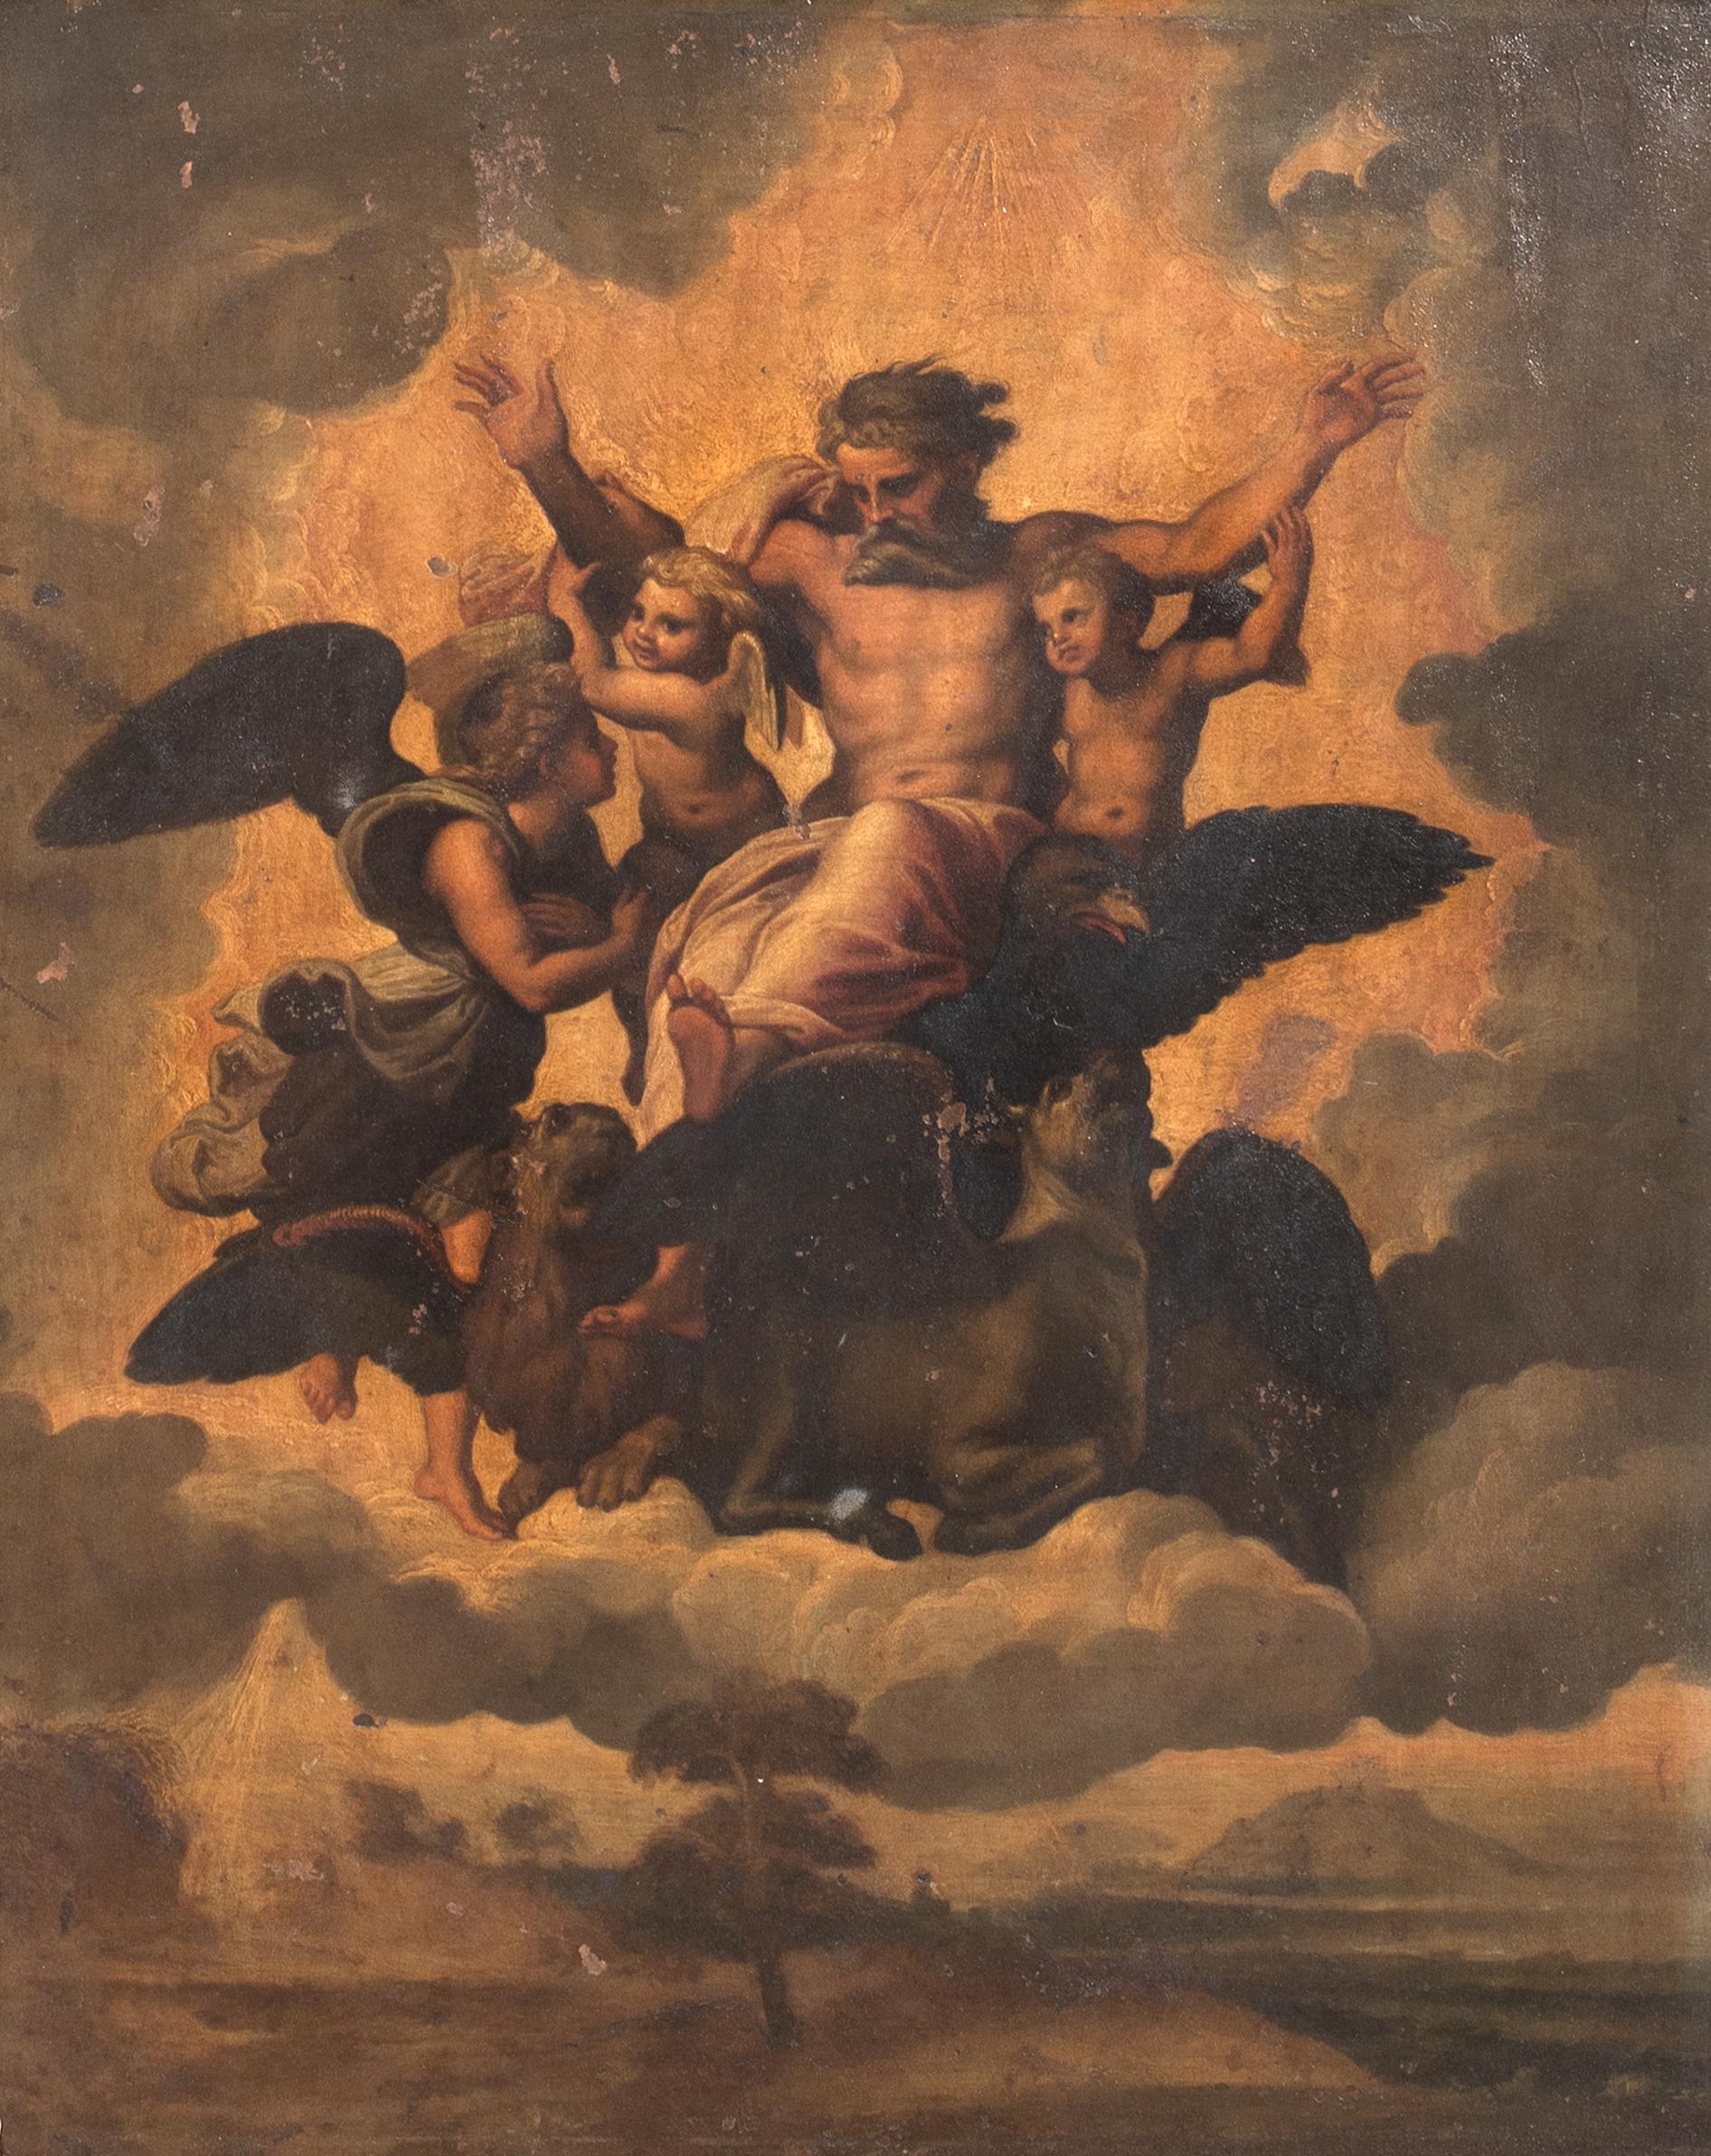 The Vision Of Ezekiel, 17th Century

after Raphael (1483-1520)

17th Century Italian Old Master depiction of The Vision Of Ezekiel, oil on copper panel. Excellent quality and condition early version of Rapheal's famous composition found in the